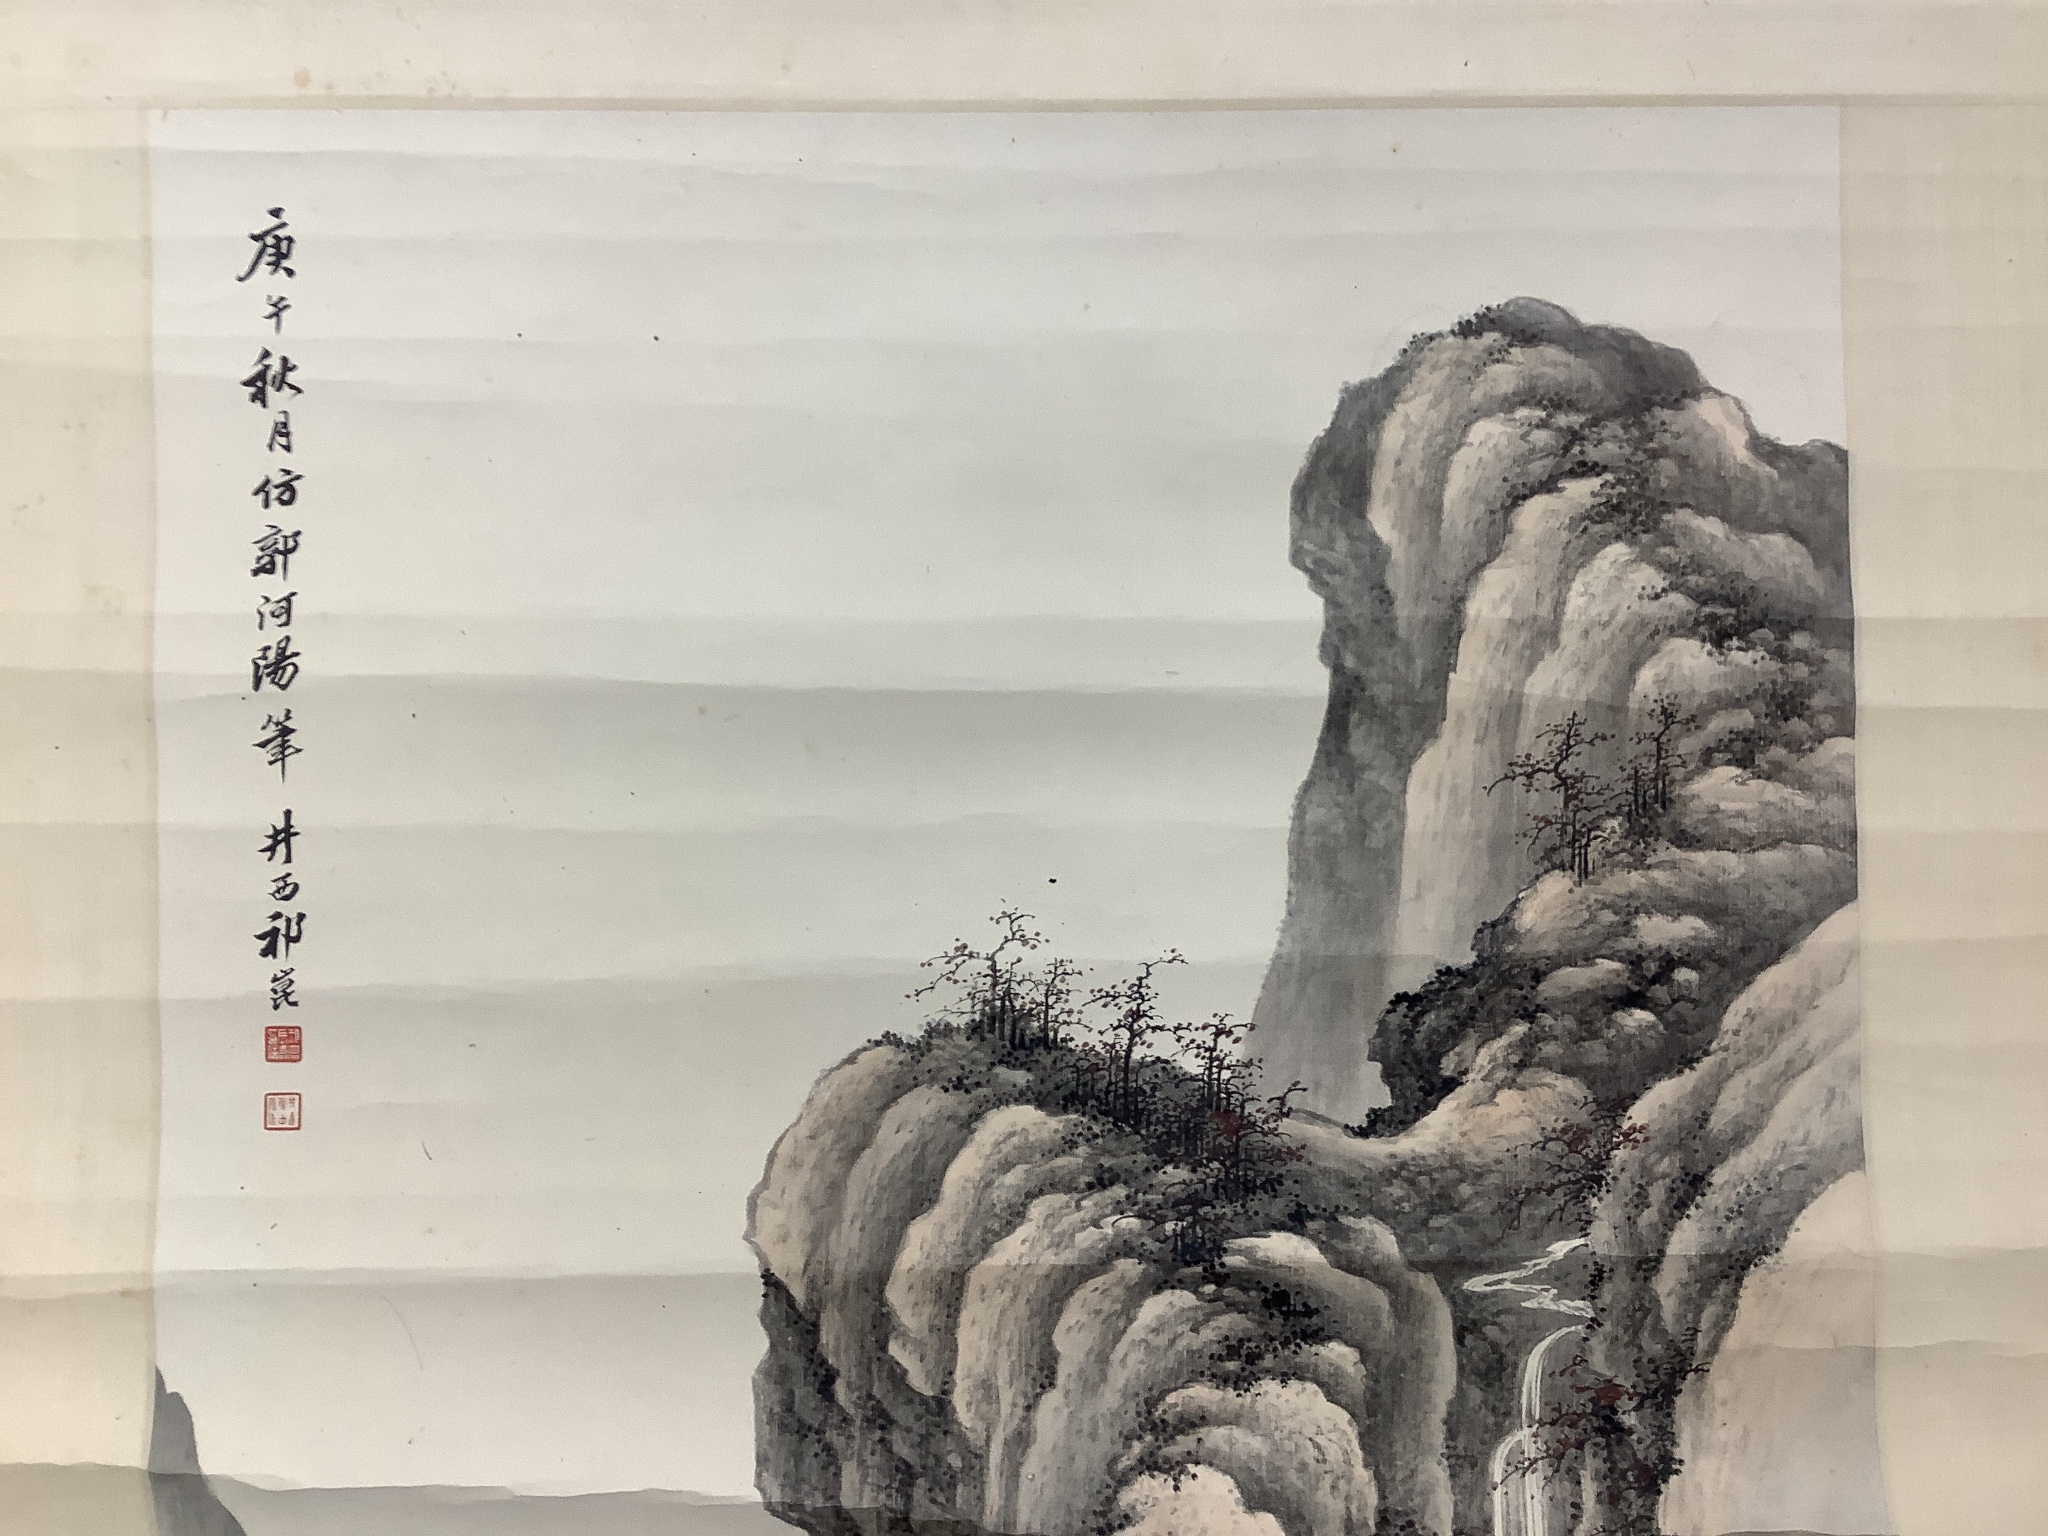 A Chinese scroll painting of a scholar seated in a mountainous river landscape, 20th century Image 94 cm X 45 cm